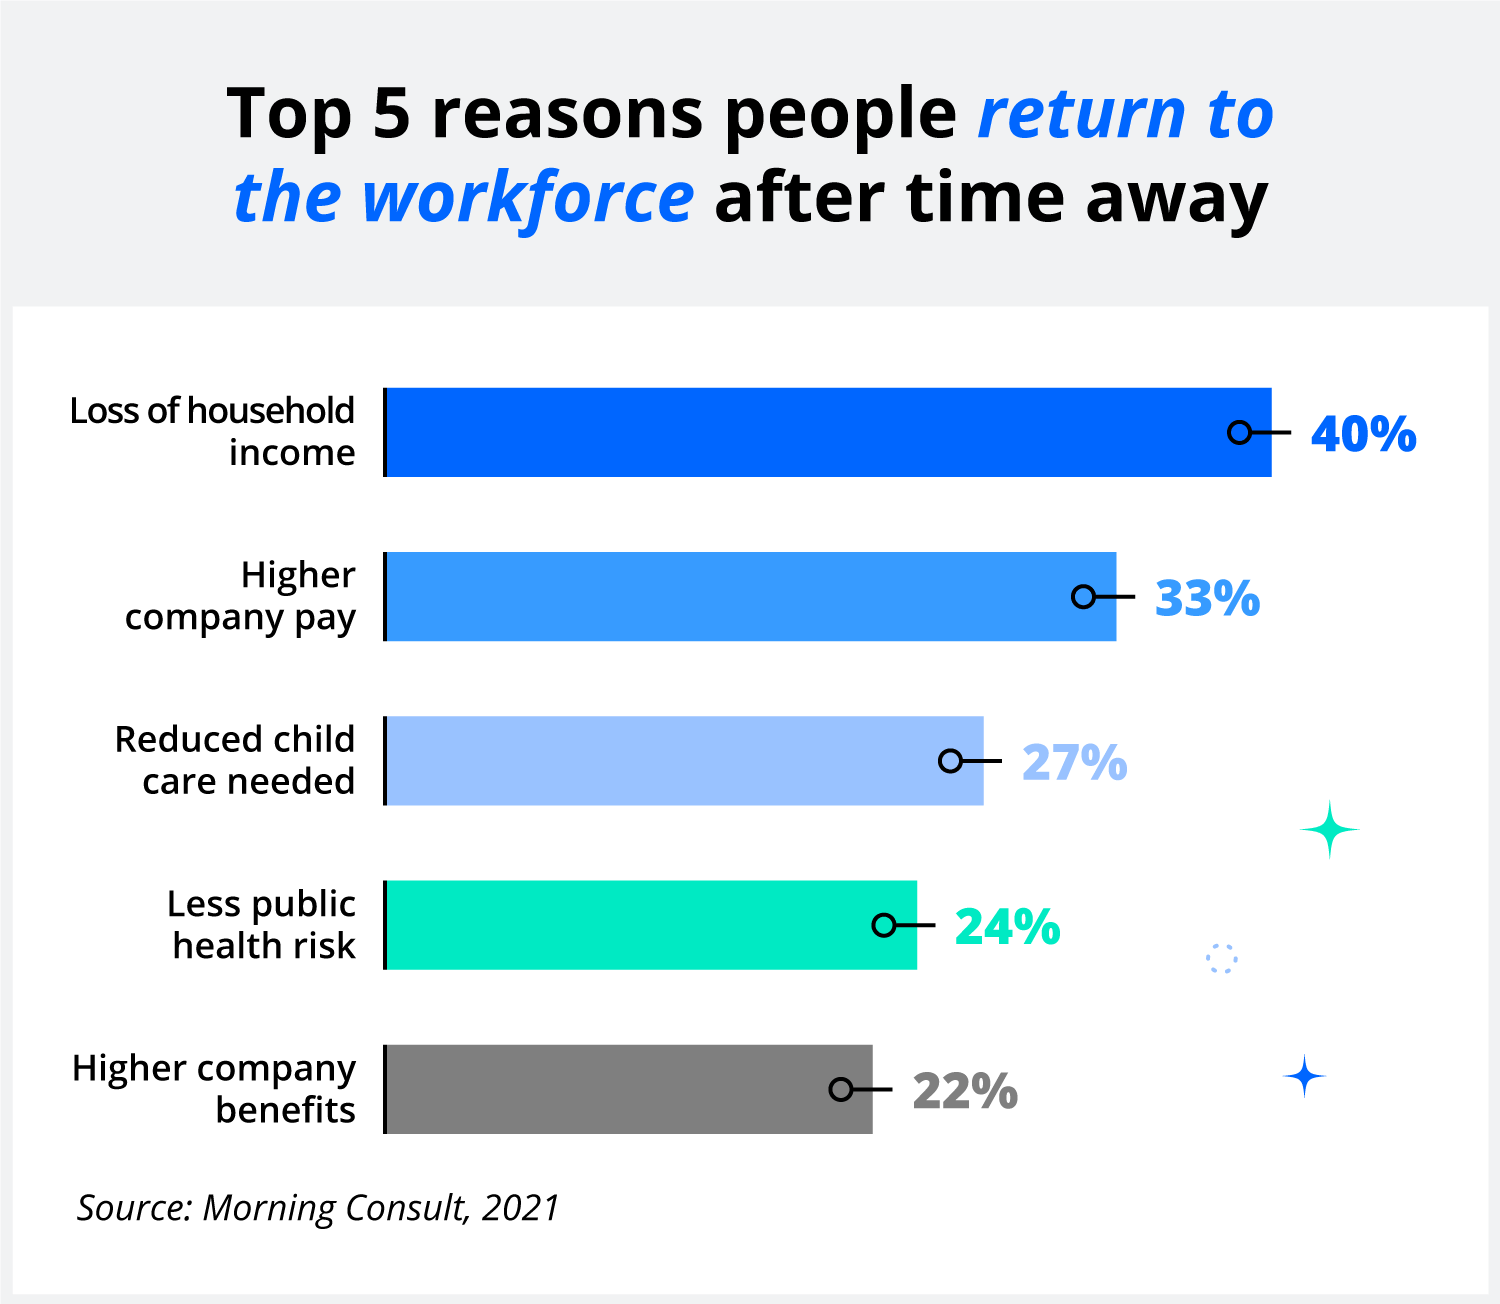 The top reasons people return to the workforce after time away include: Loss of household income, higher company pay, less need for child care, less public health risks, better company benefits. 